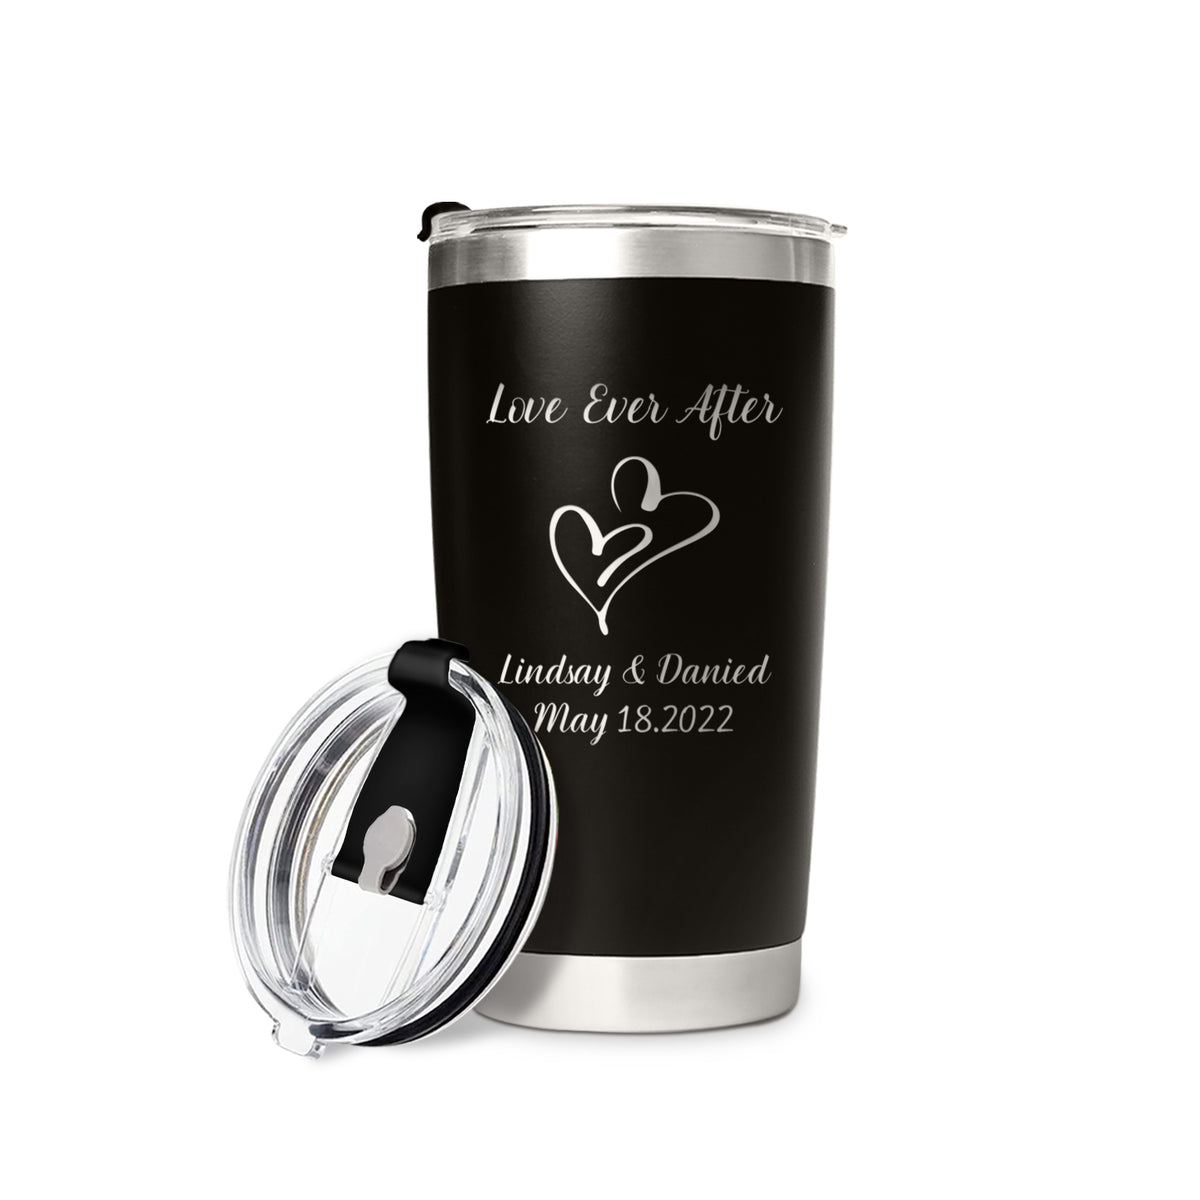 Love Ever After Engraving Personalized Coffee Tumbler With couple names